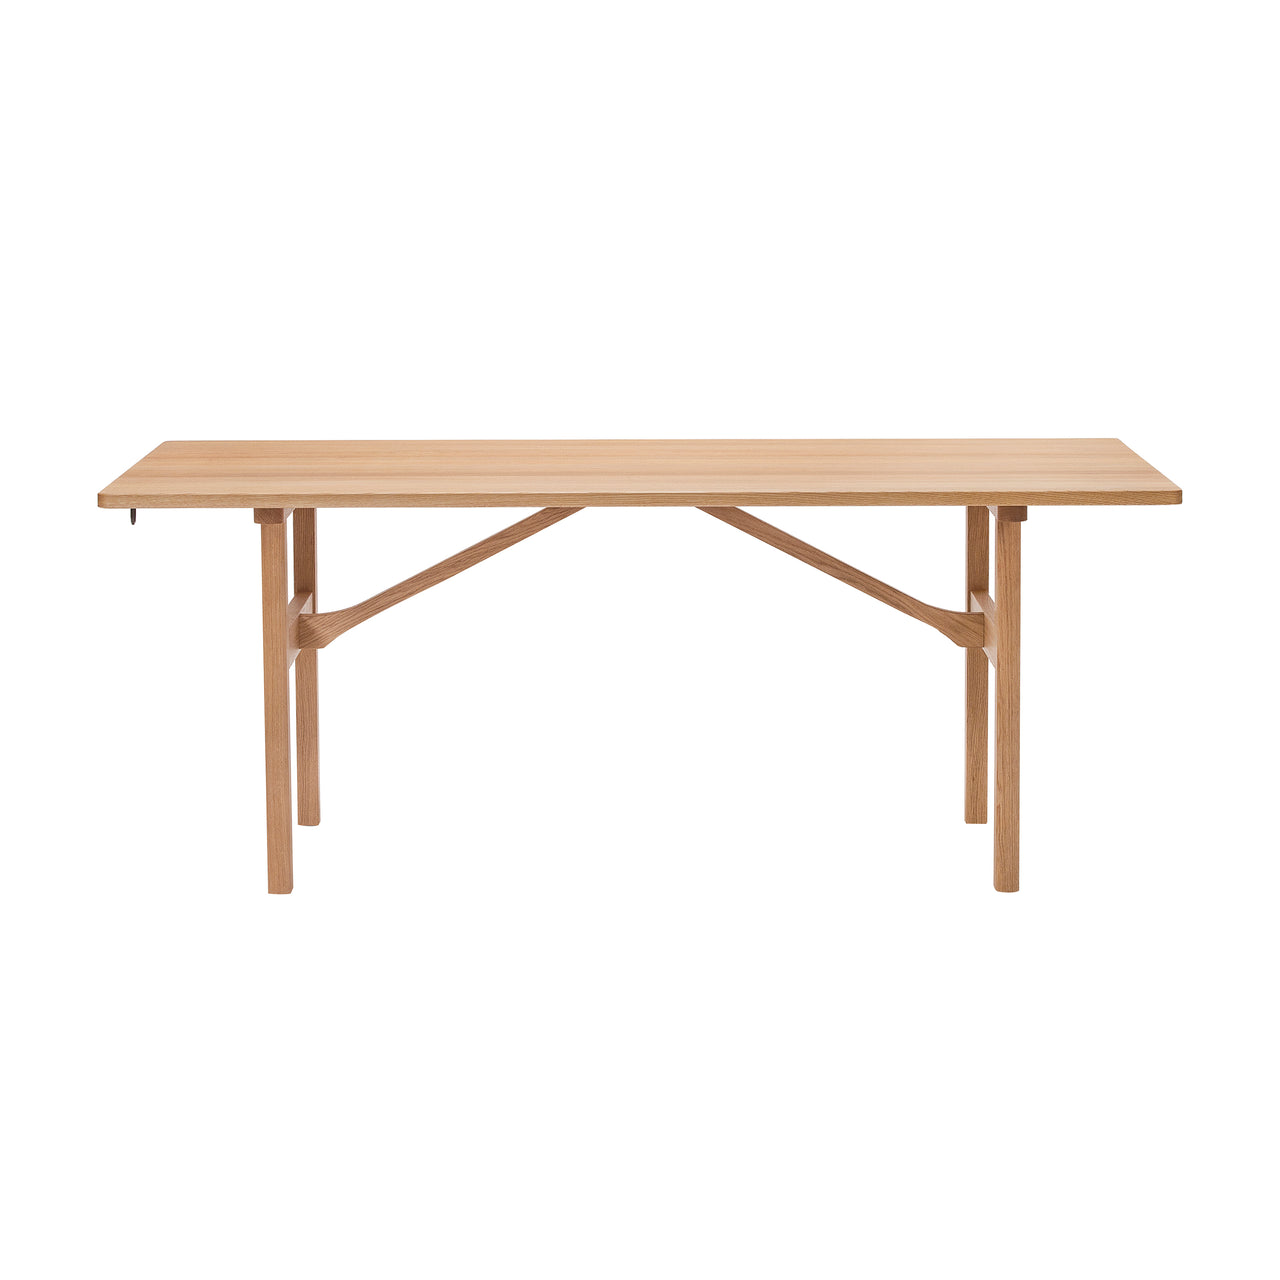 Mogensen 6284 Dining Table: Oiled Oak + Without Leaf